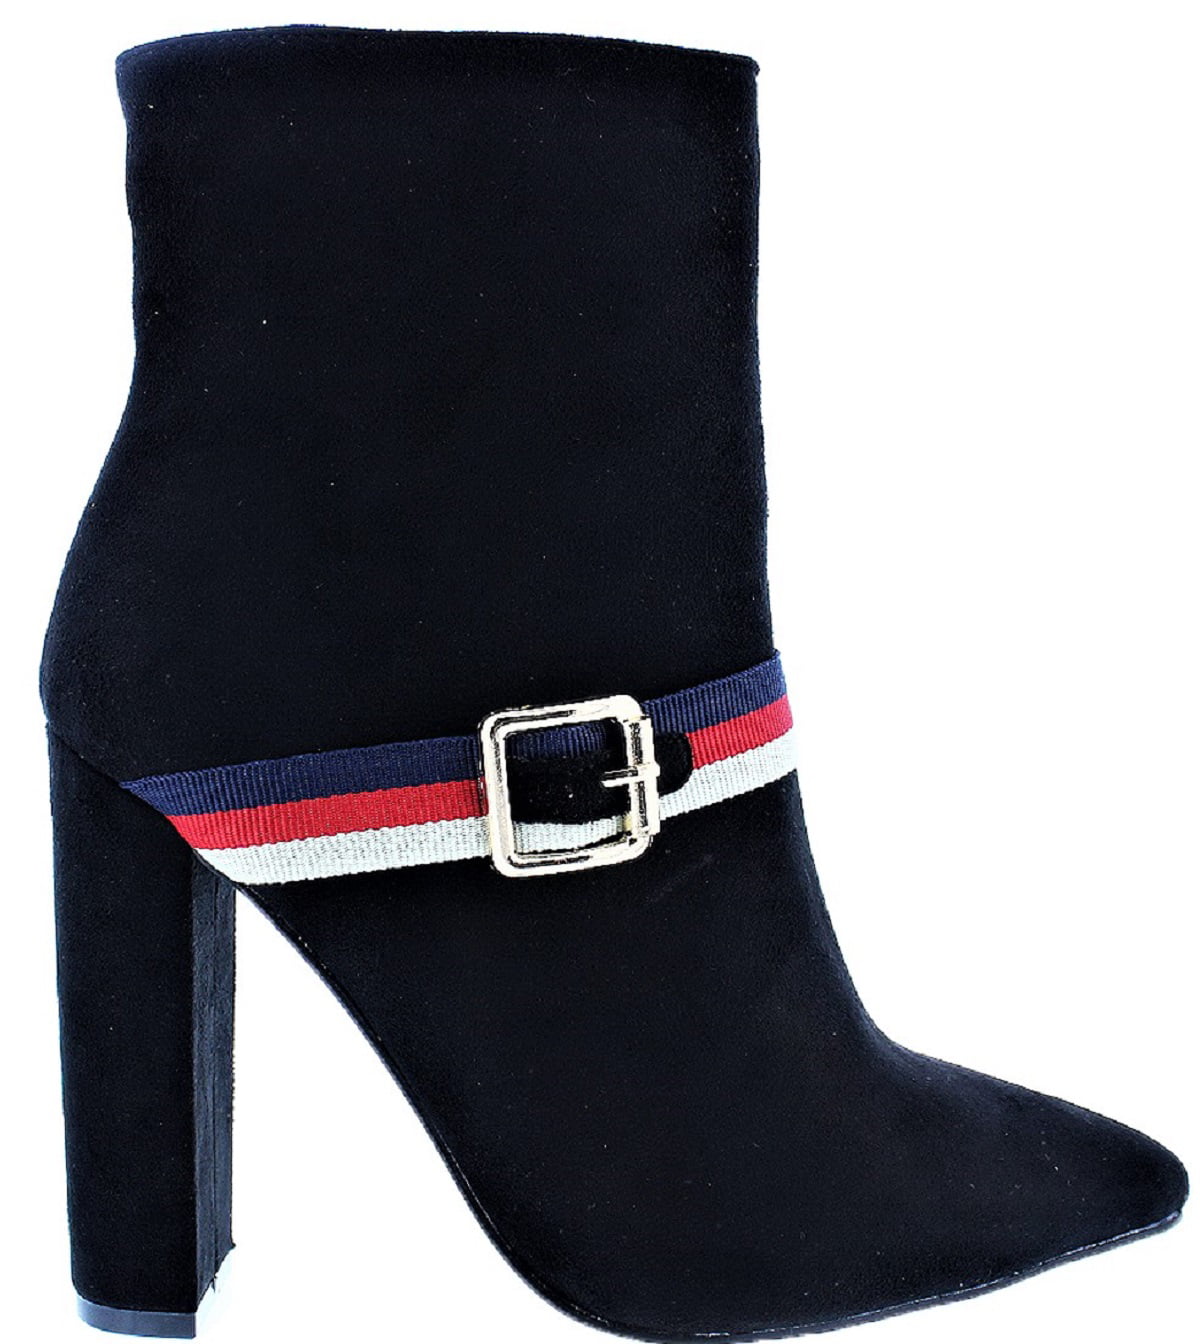 Womens block high-heeled pointed toe buckle side zipper ankle boots shoes 